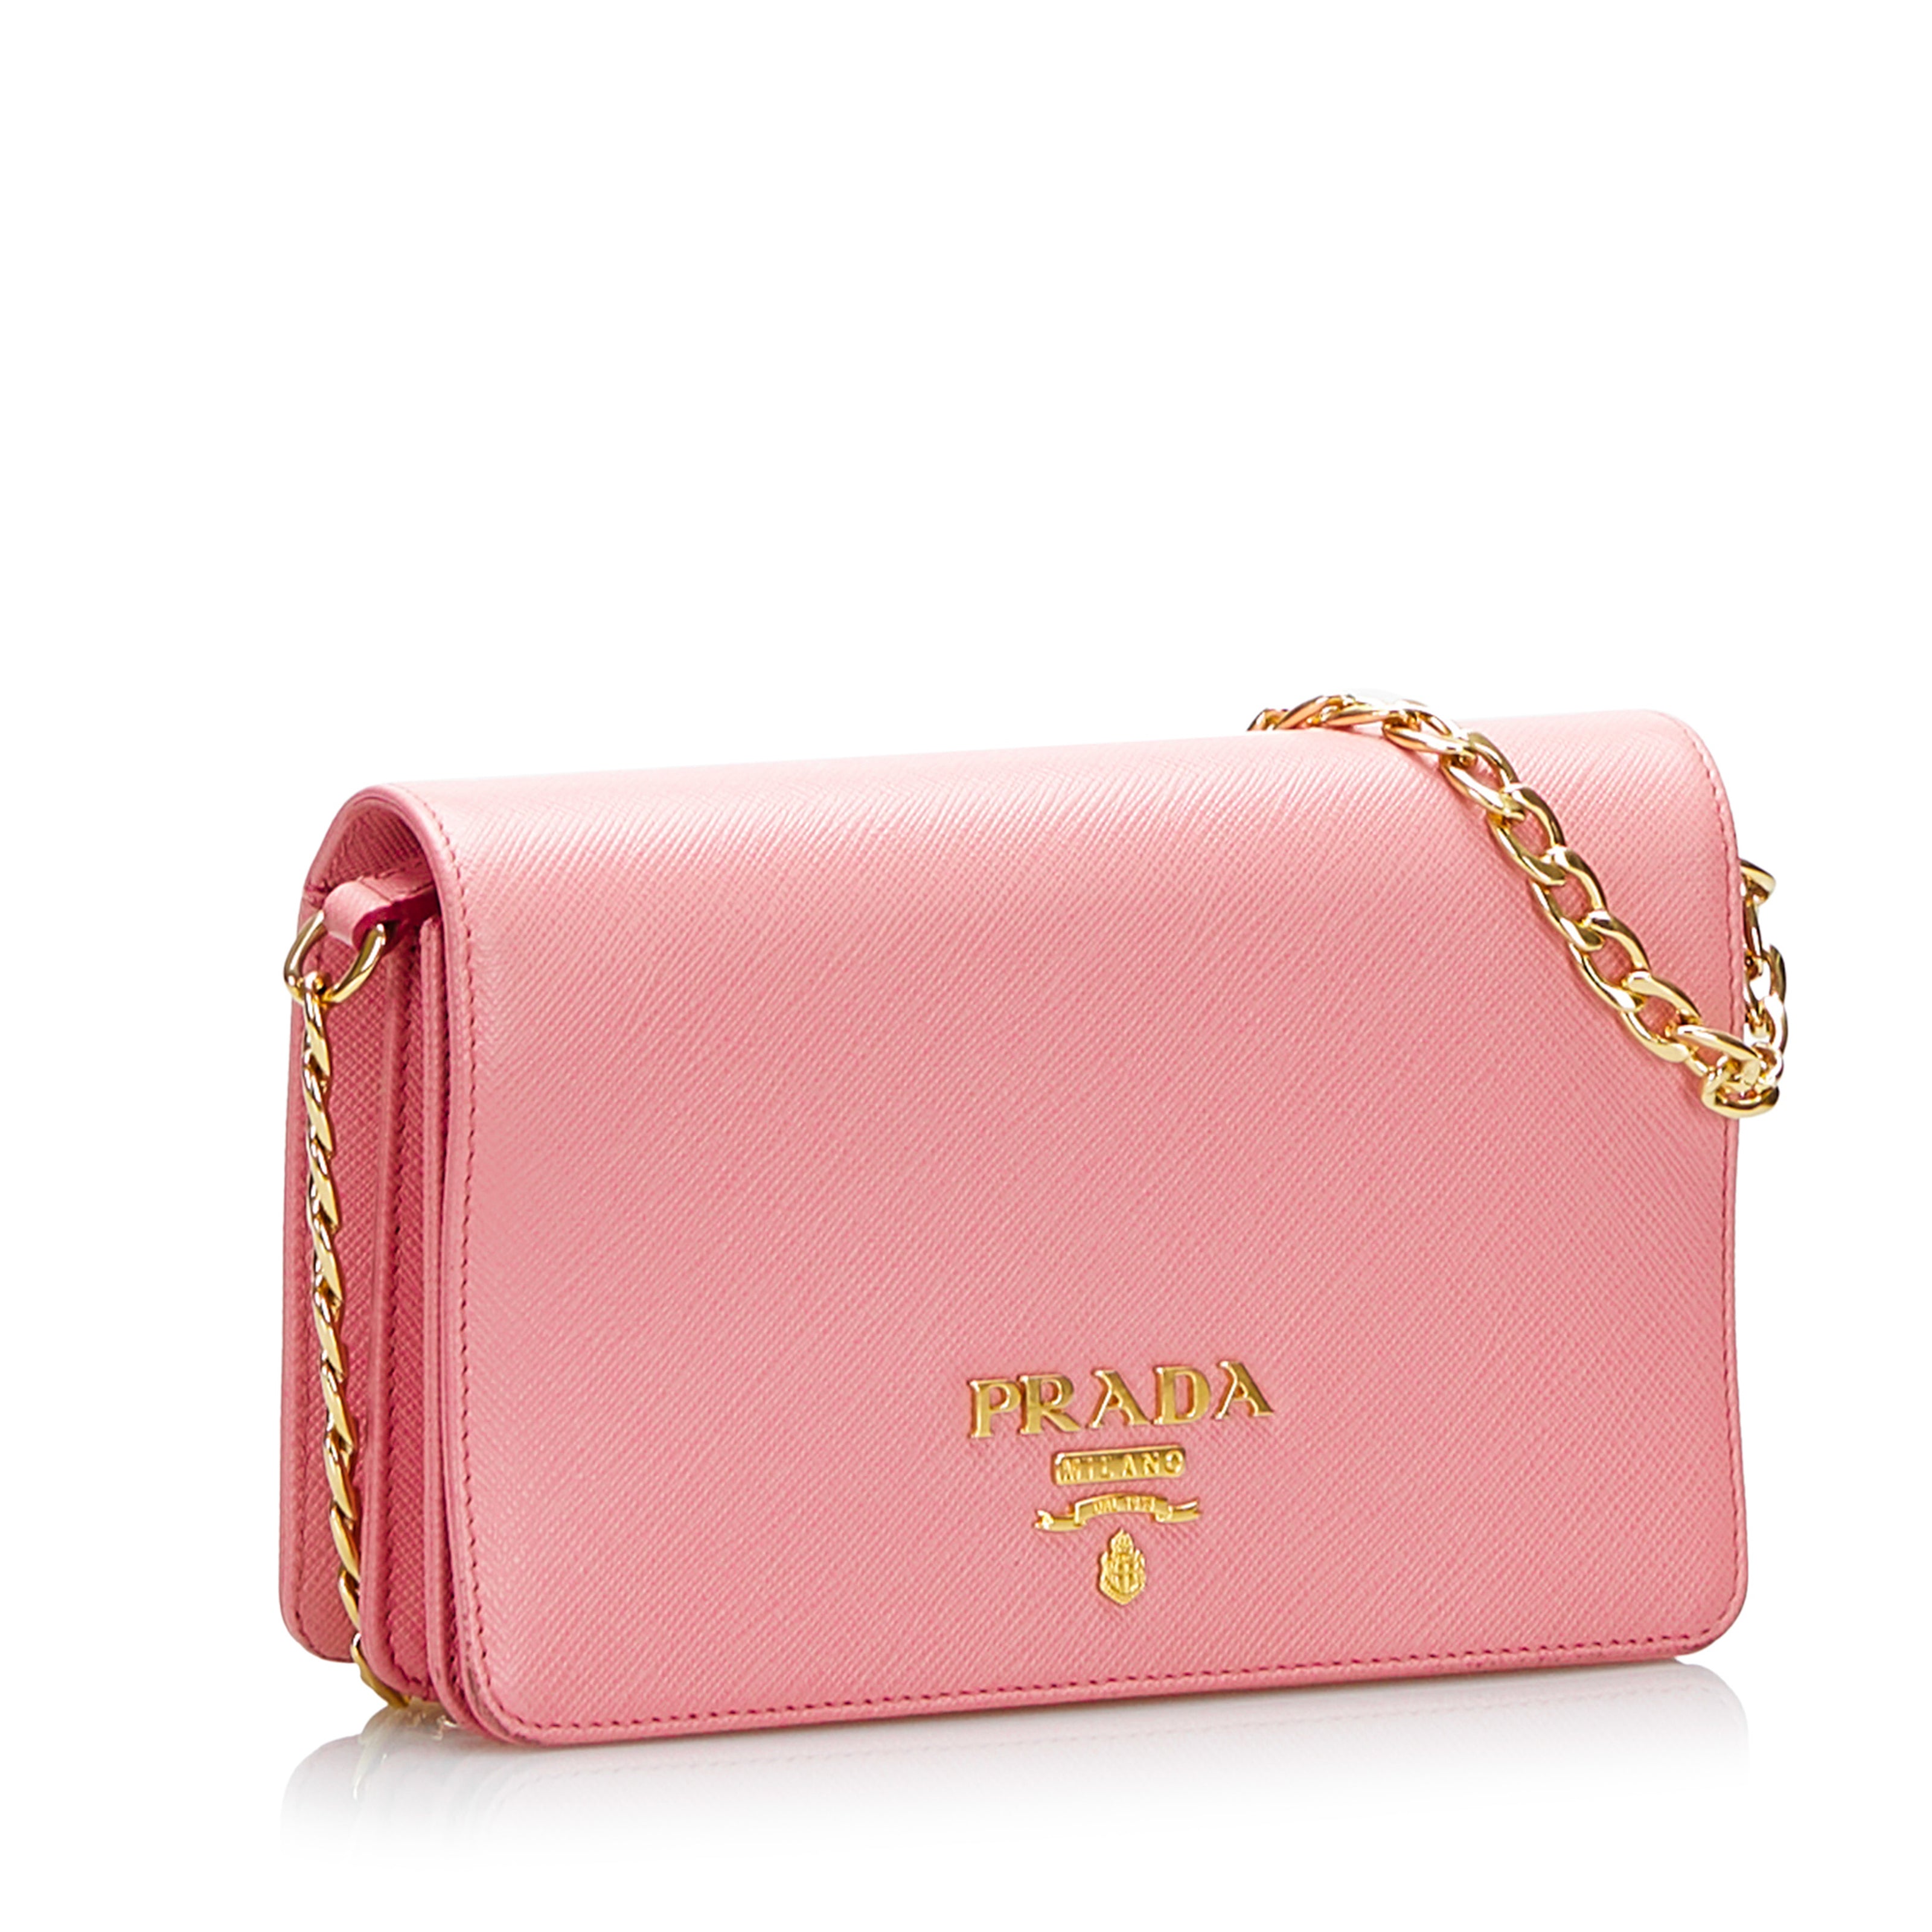 Prada Saffiano Metal Wallet On Chain Clutch 4pt916 Pink Leather